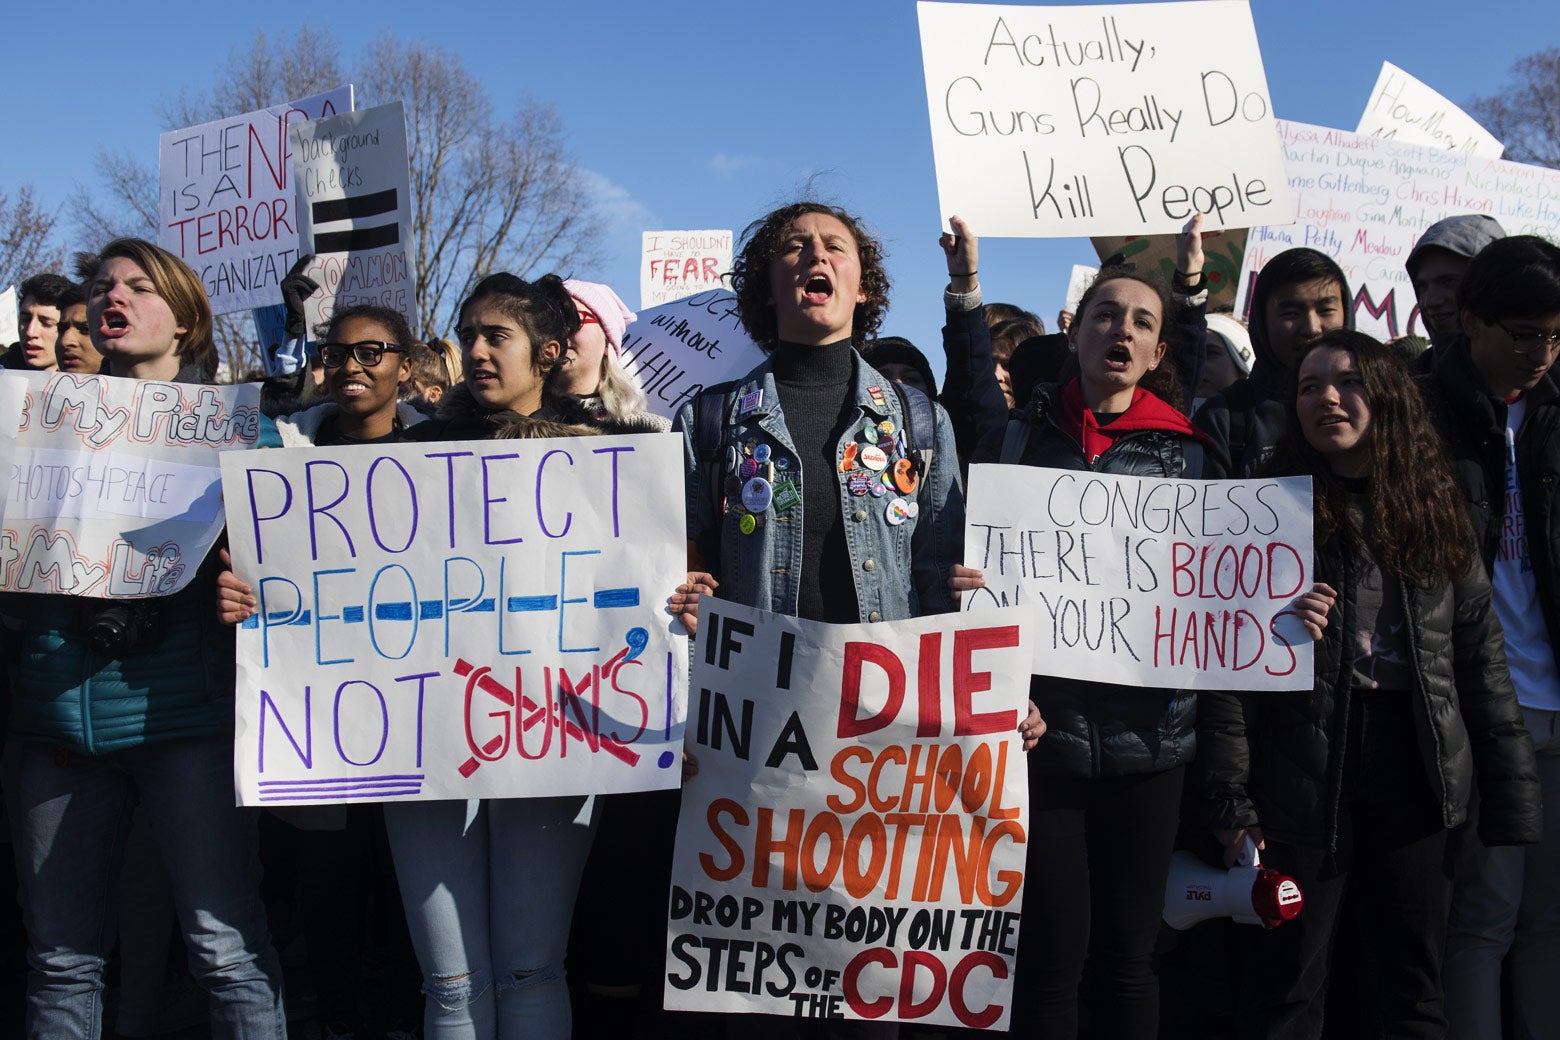 Students hold up signs saying things like, "Protect people not guns."